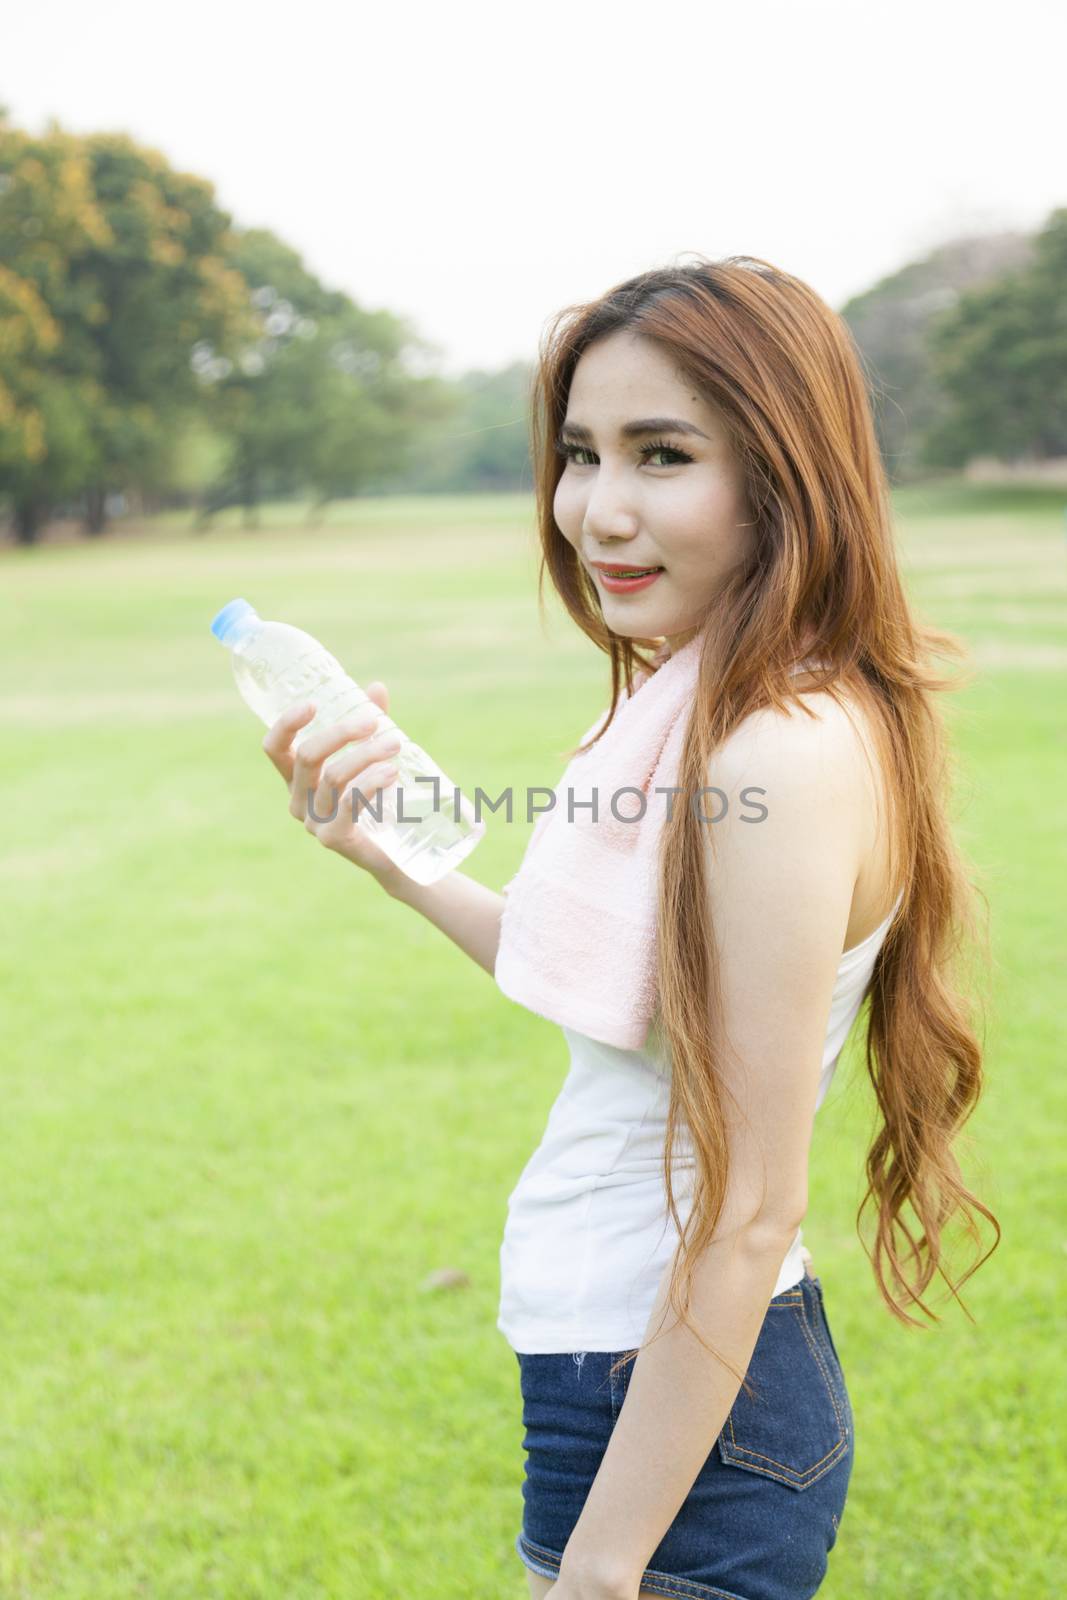 Woman holding a bottle of water. Jogging on grass in the park.